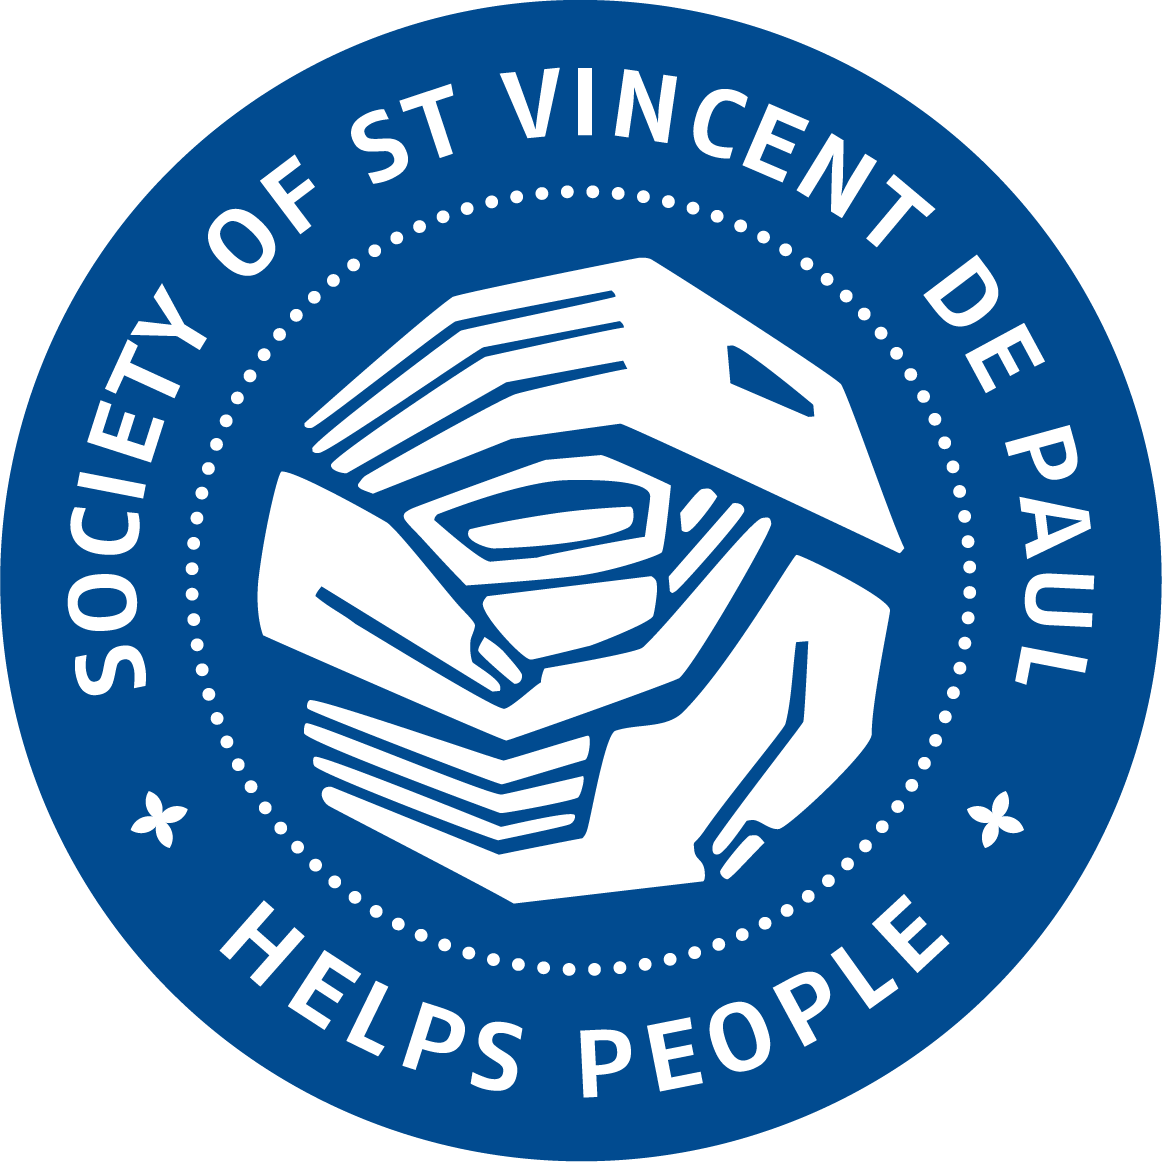 Society of St Vincent de Paul in New Zealand 